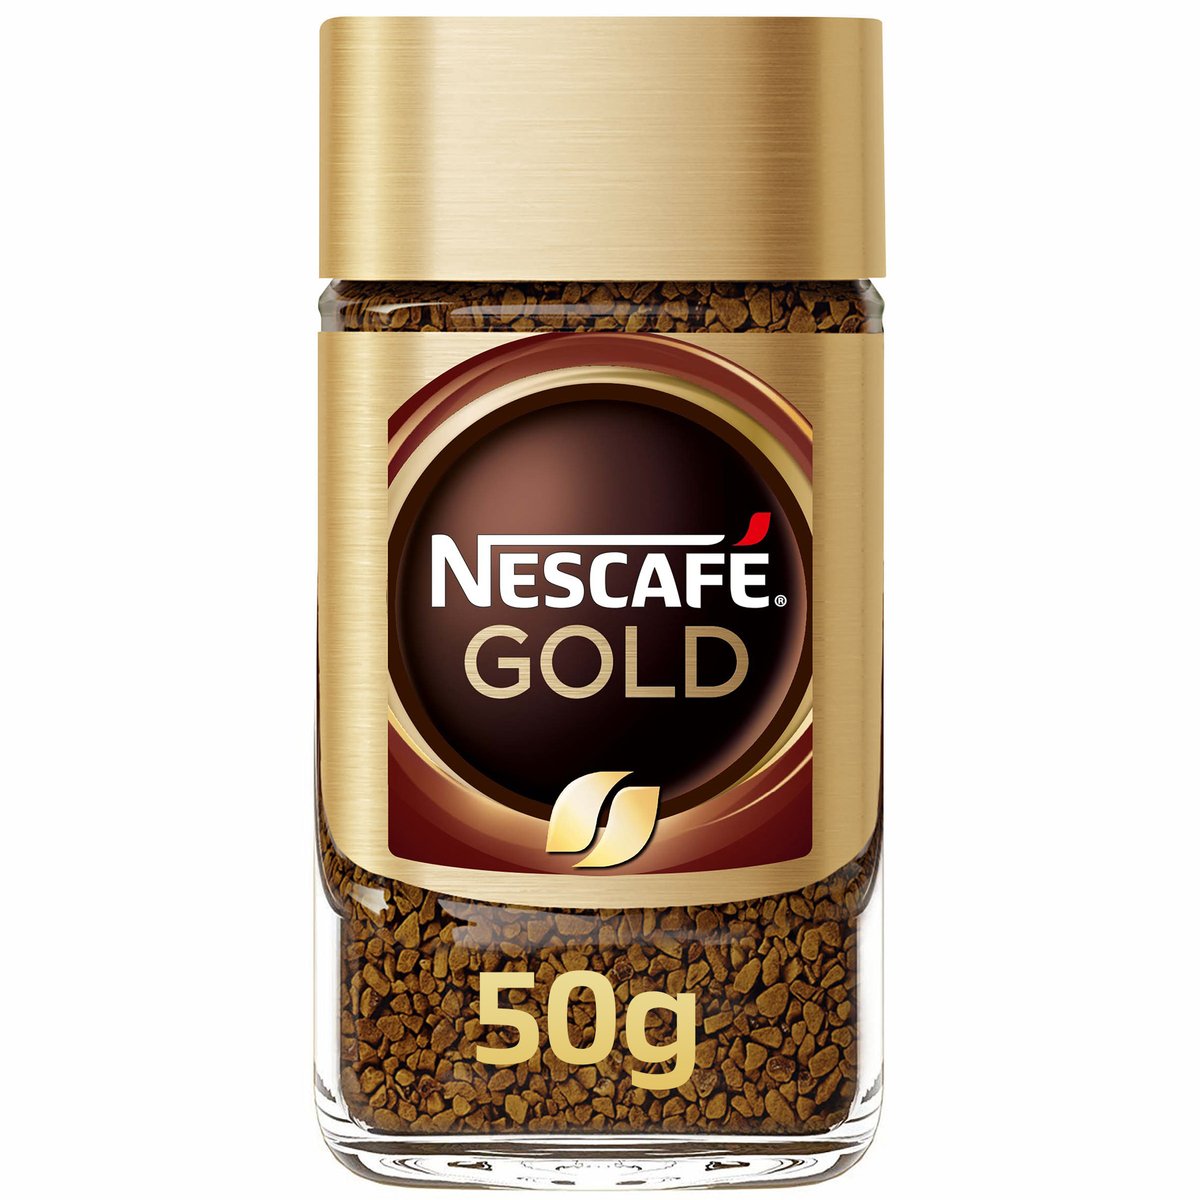 Nescafe Gold Instant Coffee 50g